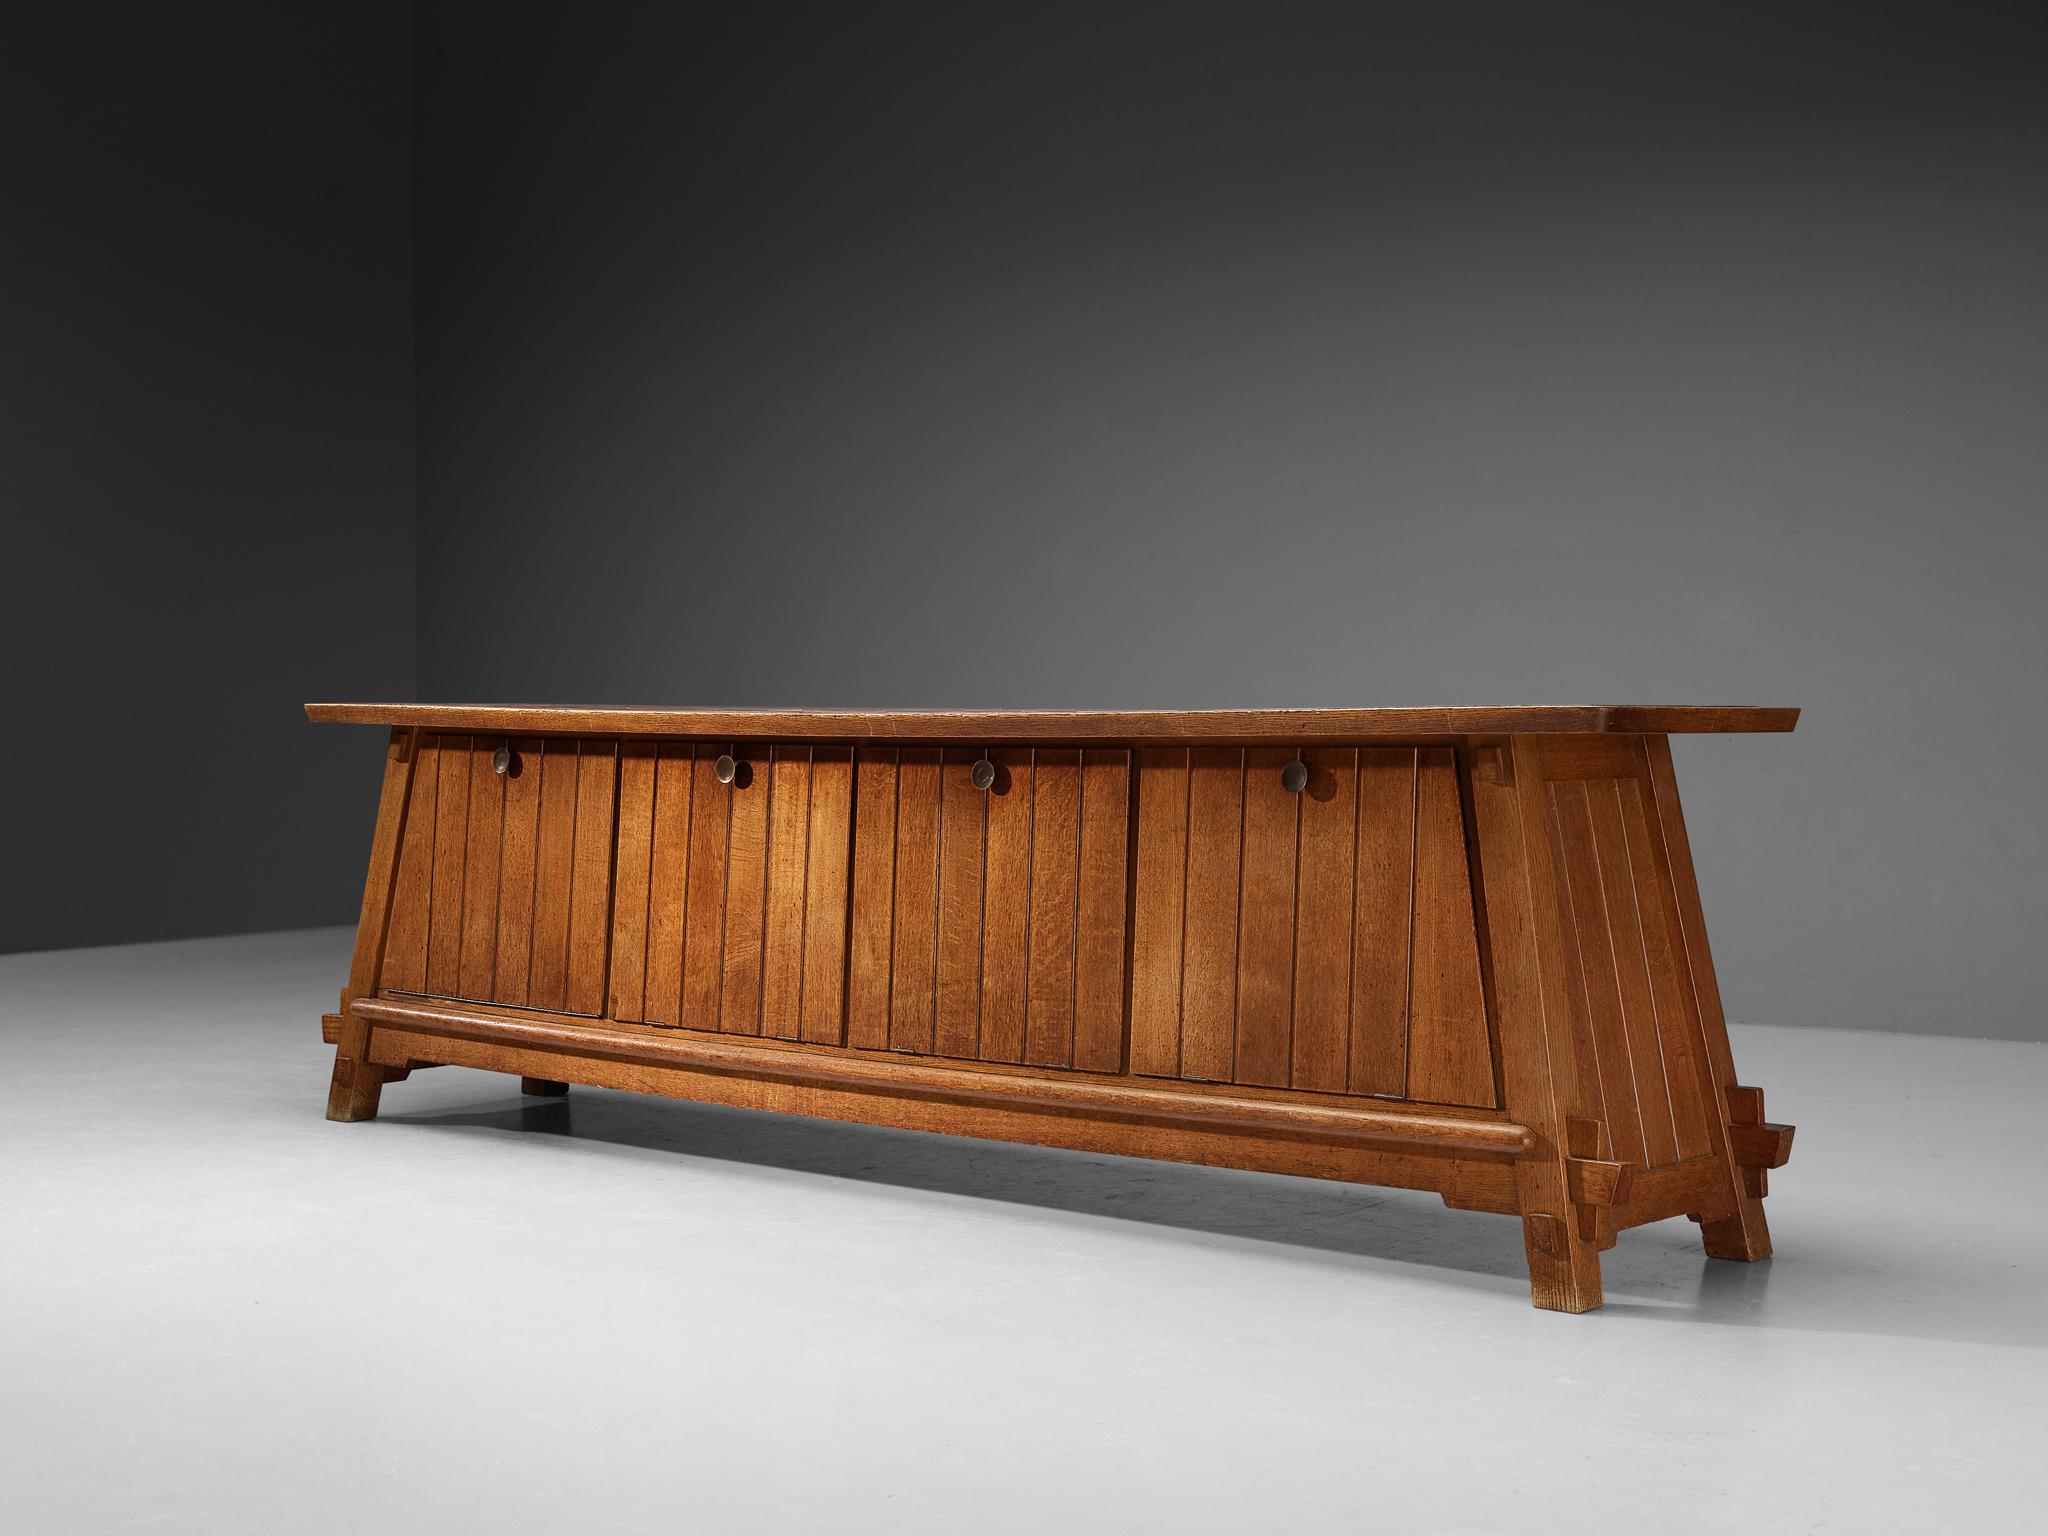 Bas van Pelt, sideboard, oak, brass, terracotta, The Netherlands, 1940s

This grand sideboard by Dutch designer Bas van Pelt is exemplary for refined, highly detailed and very well-made furniture. The corpus is based on a trapezoid shape which is